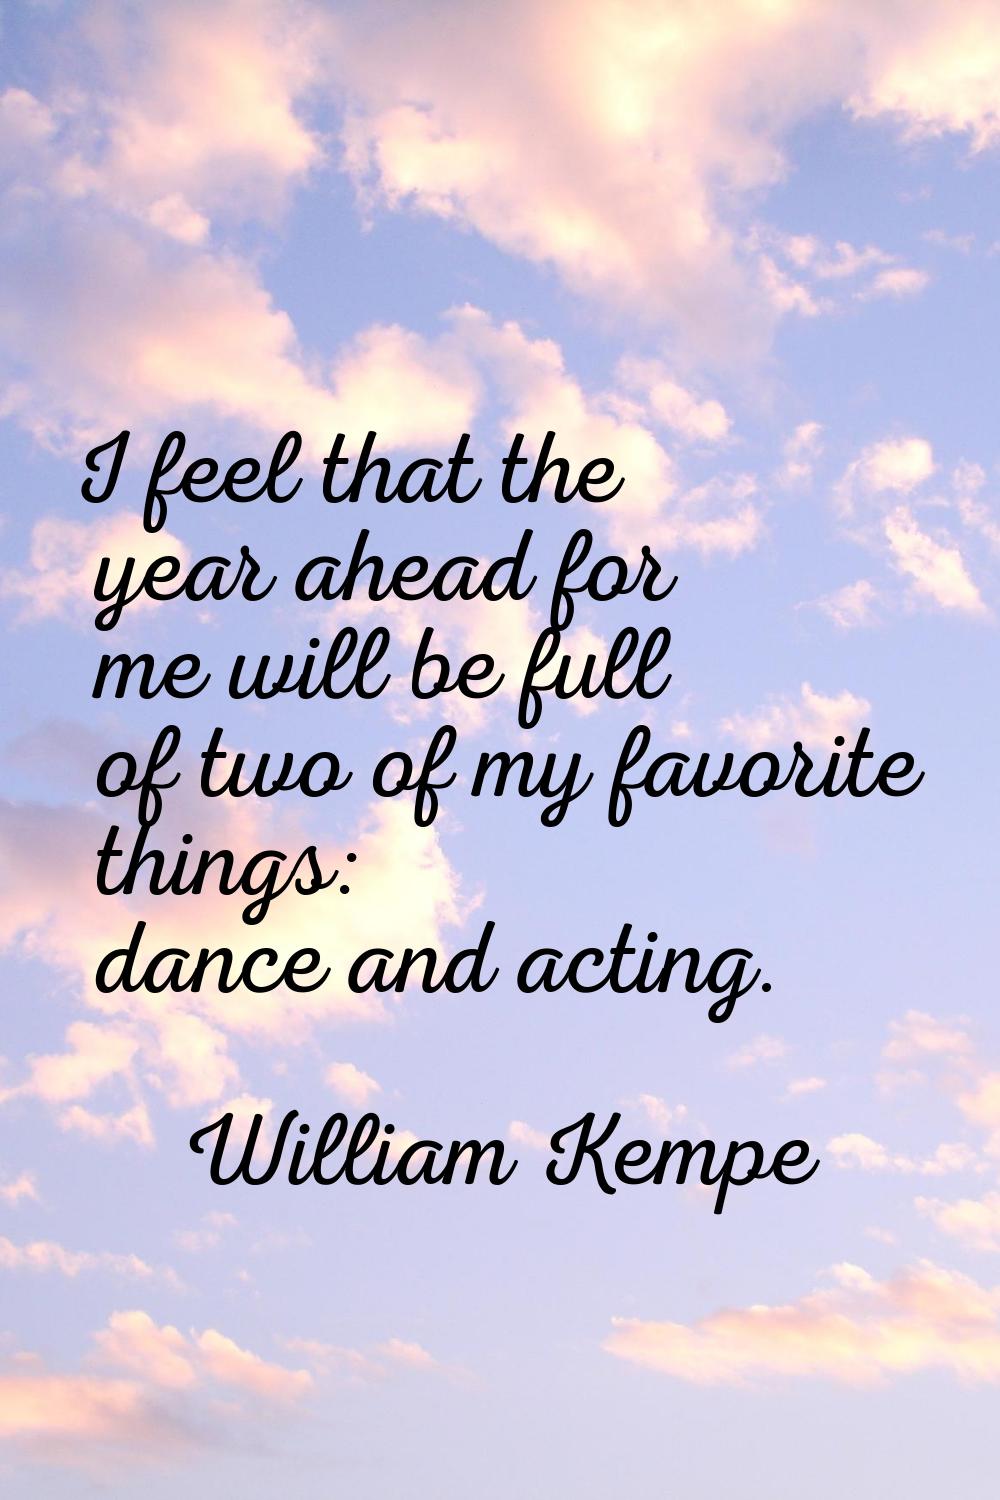 I feel that the year ahead for me will be full of two of my favorite things: dance and acting.